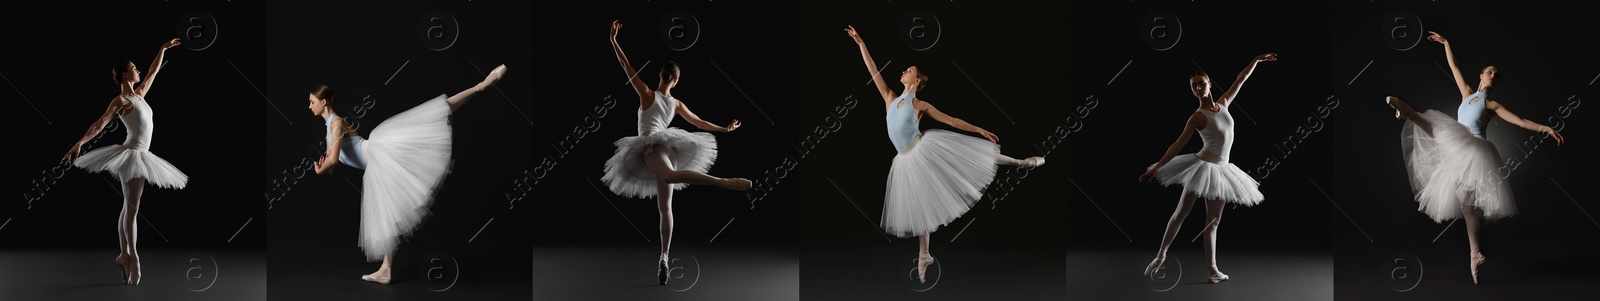 Image of Ballerina practicing dance moves on black background, set of photos